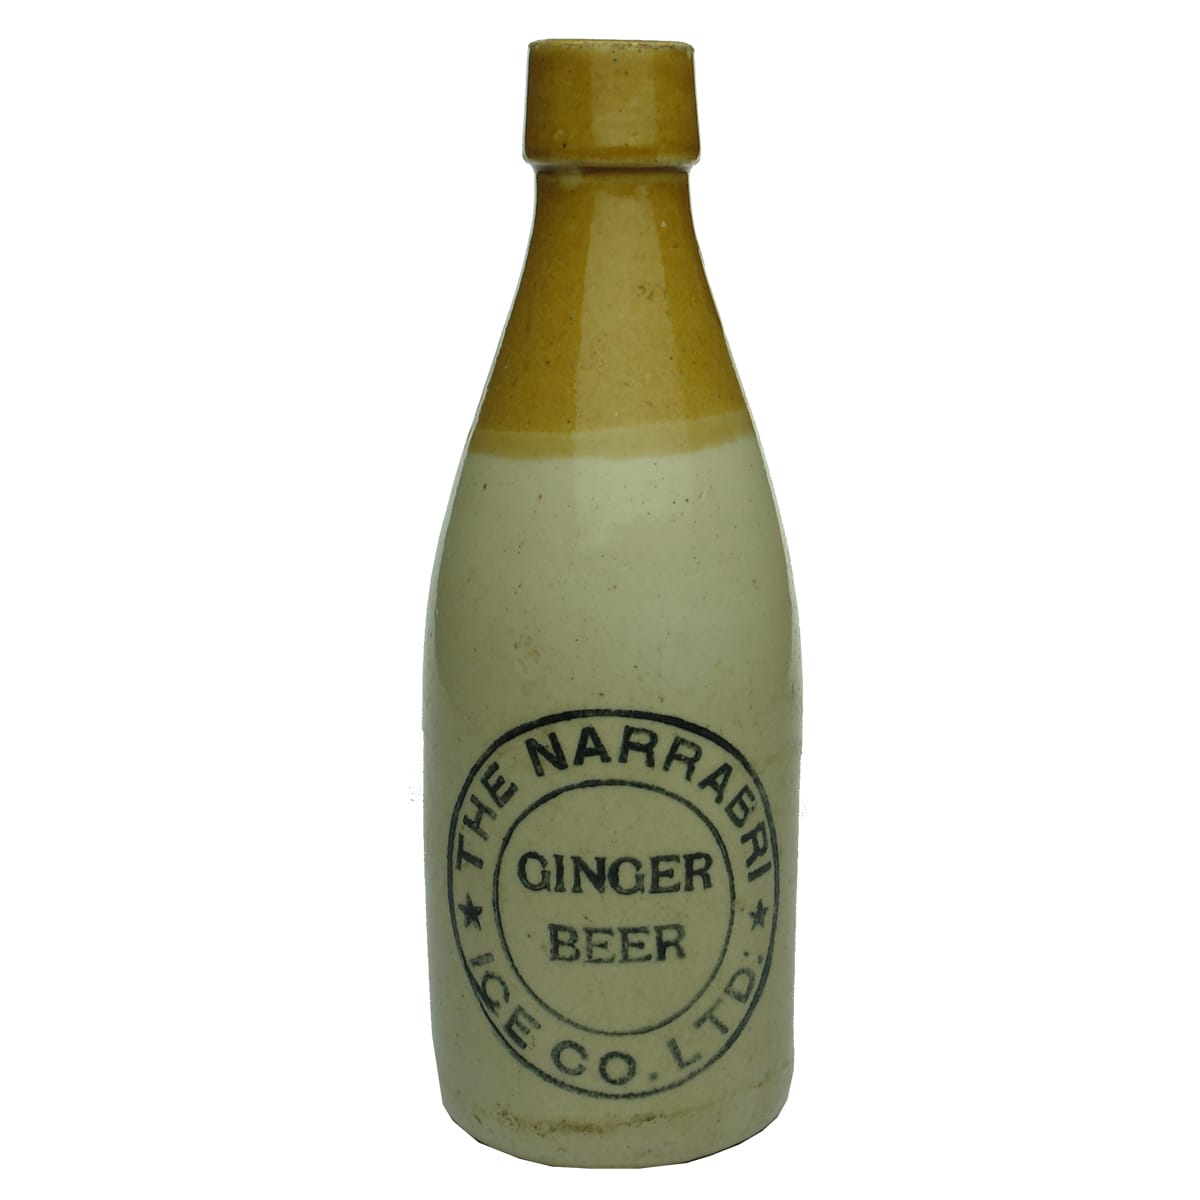 Ginger Beer. The Narrabri Ice Co. Ltd. Champagne. Cork Top. Tan Top. (New South Wales)